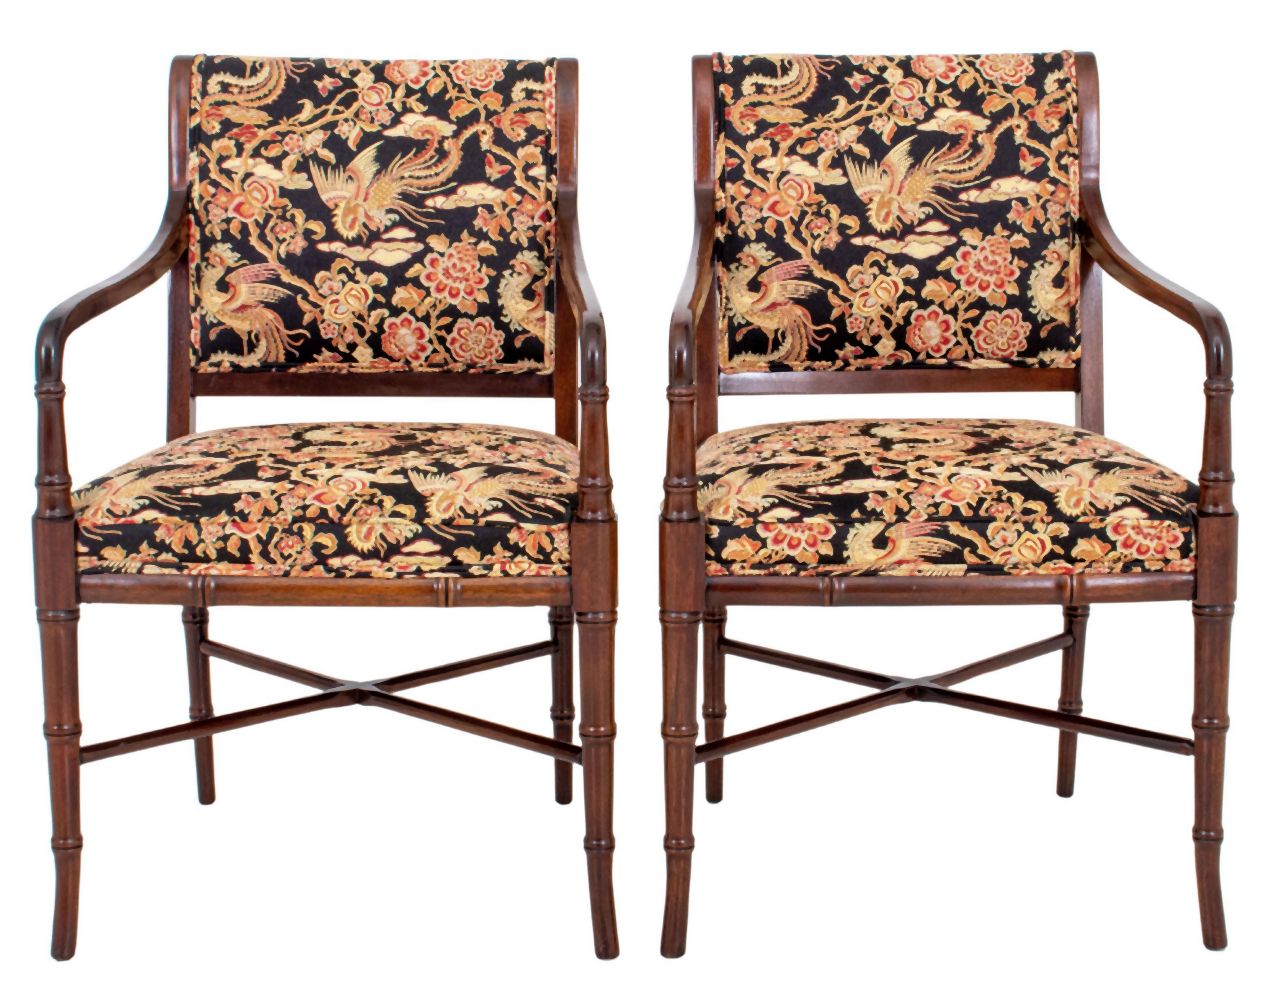 REGENCY STYLE FAUX BAMBOO ARM CHAIRS  3ceb6c